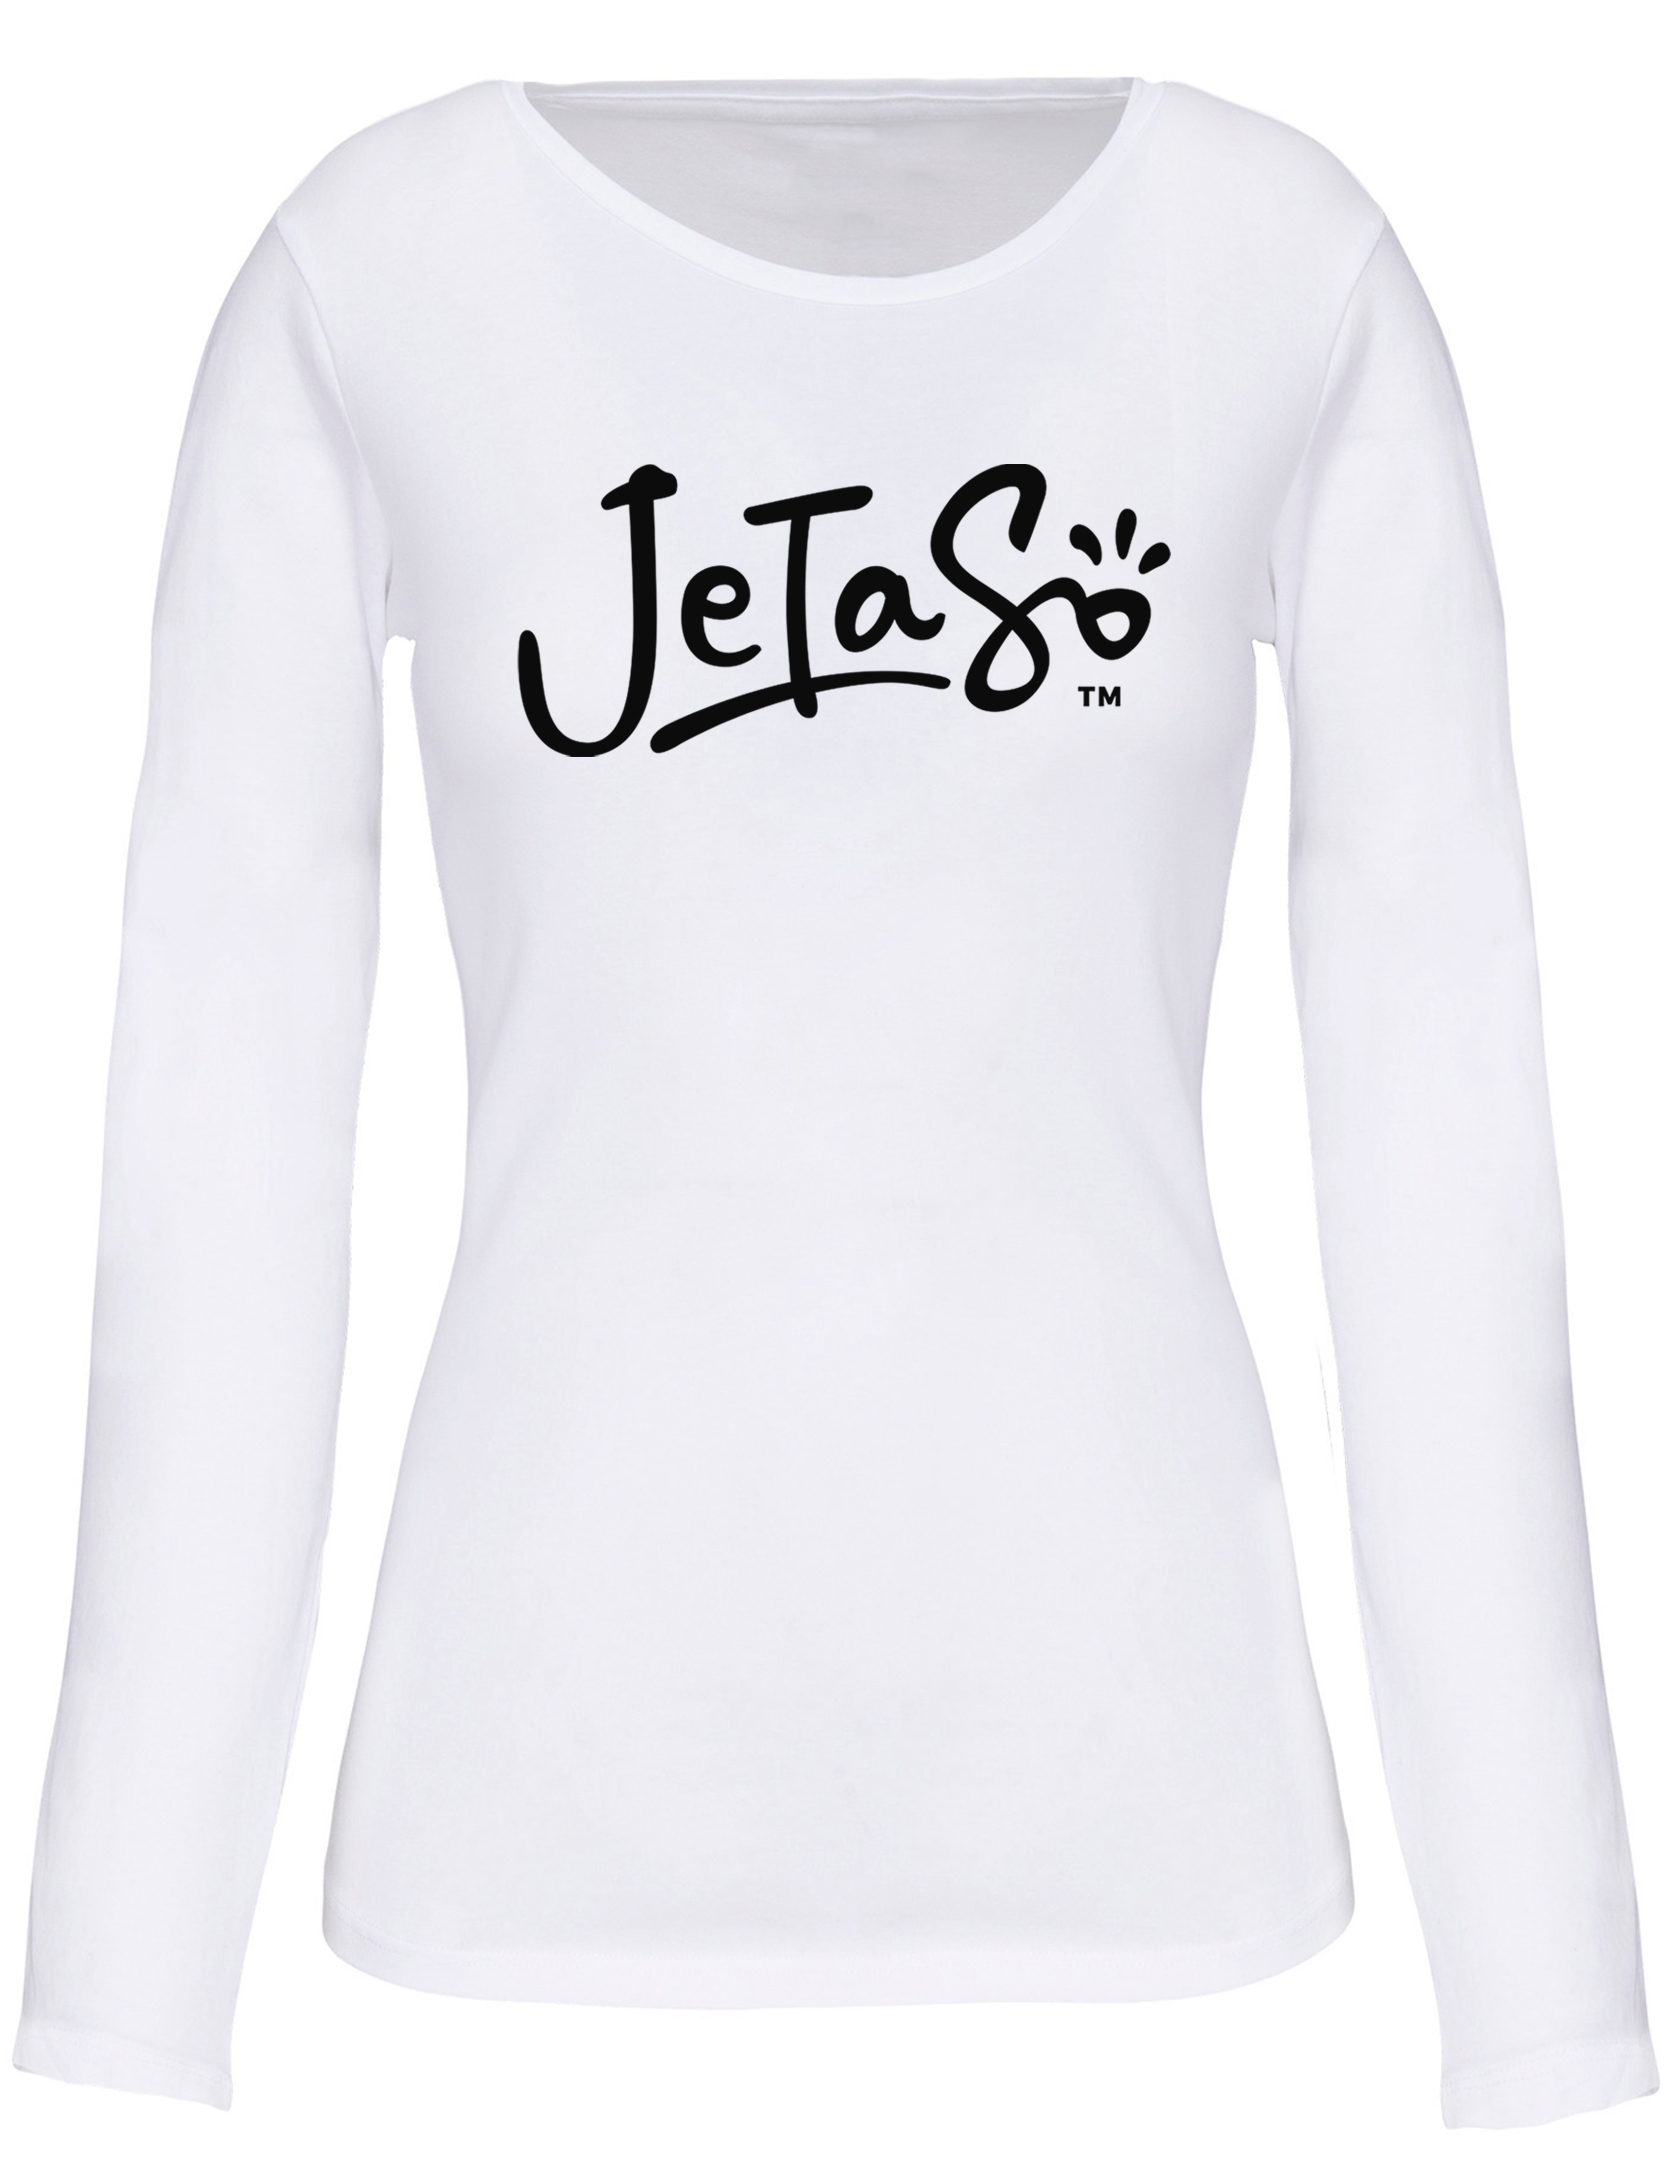 Round neck long-sleeved Ladies  t-shirt - loose fit